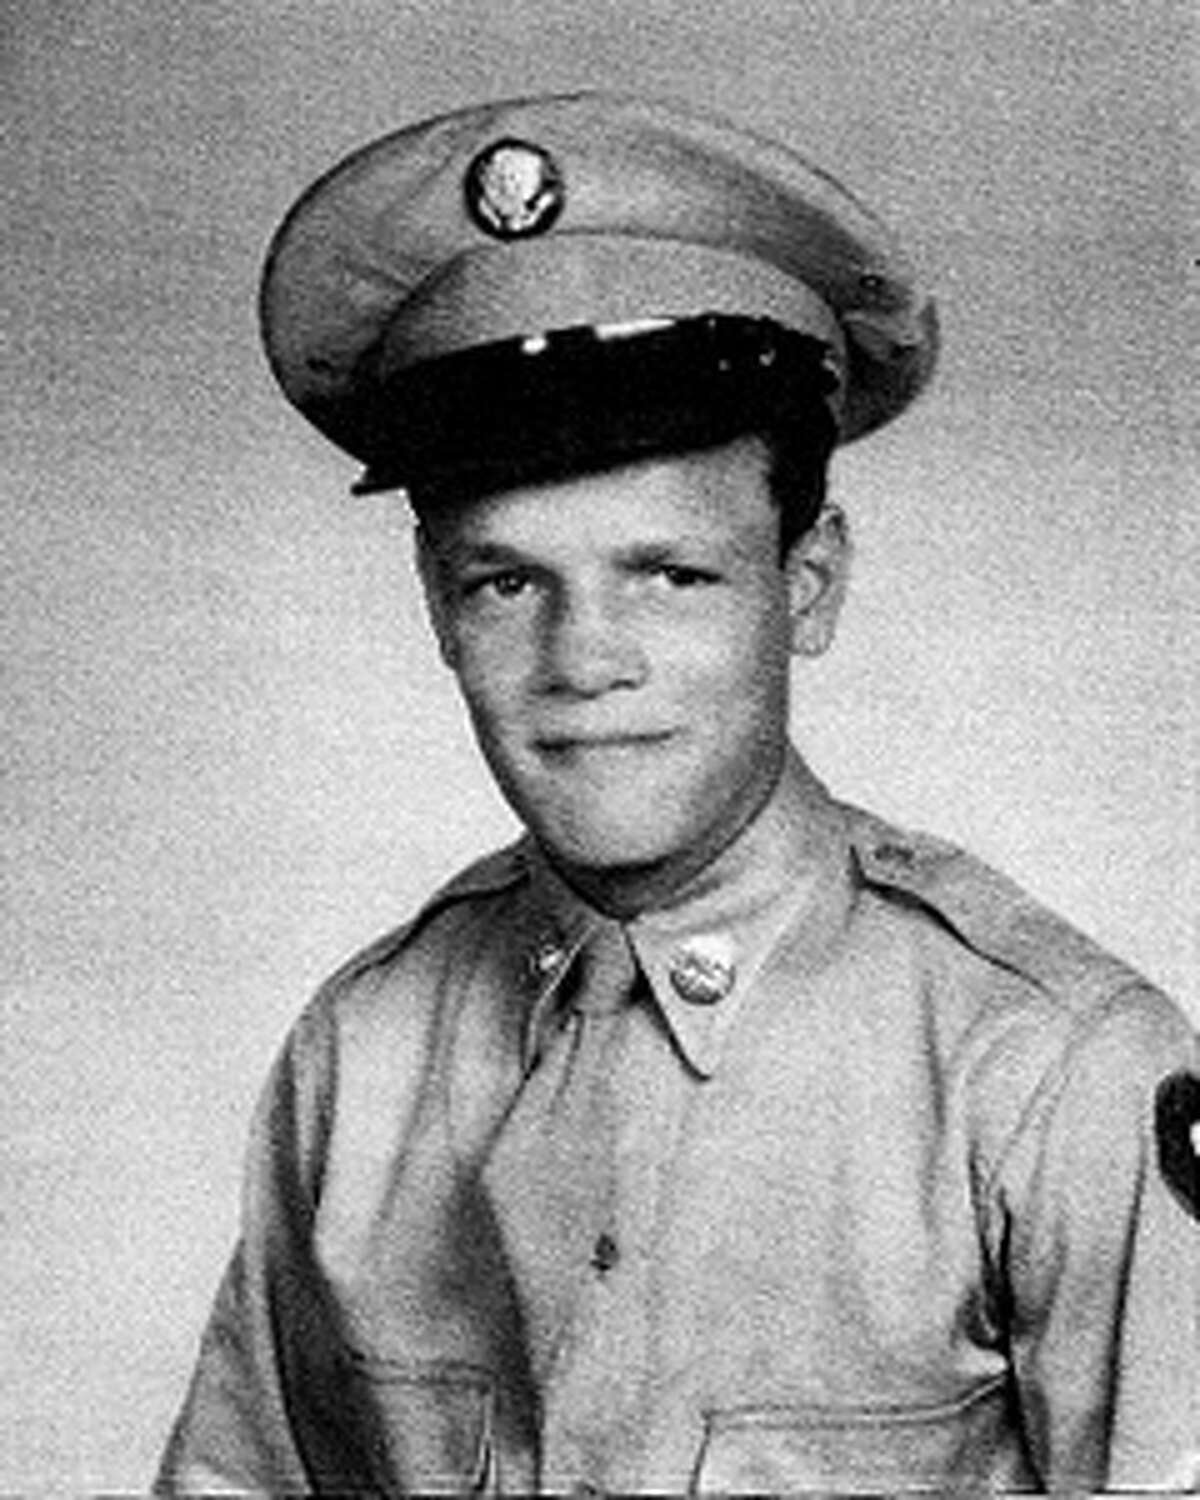 The remains of 19-year-old Army Sgt. Howard R. Belden, of Hague, were found 71 years after he was reported missing during the Korean War.